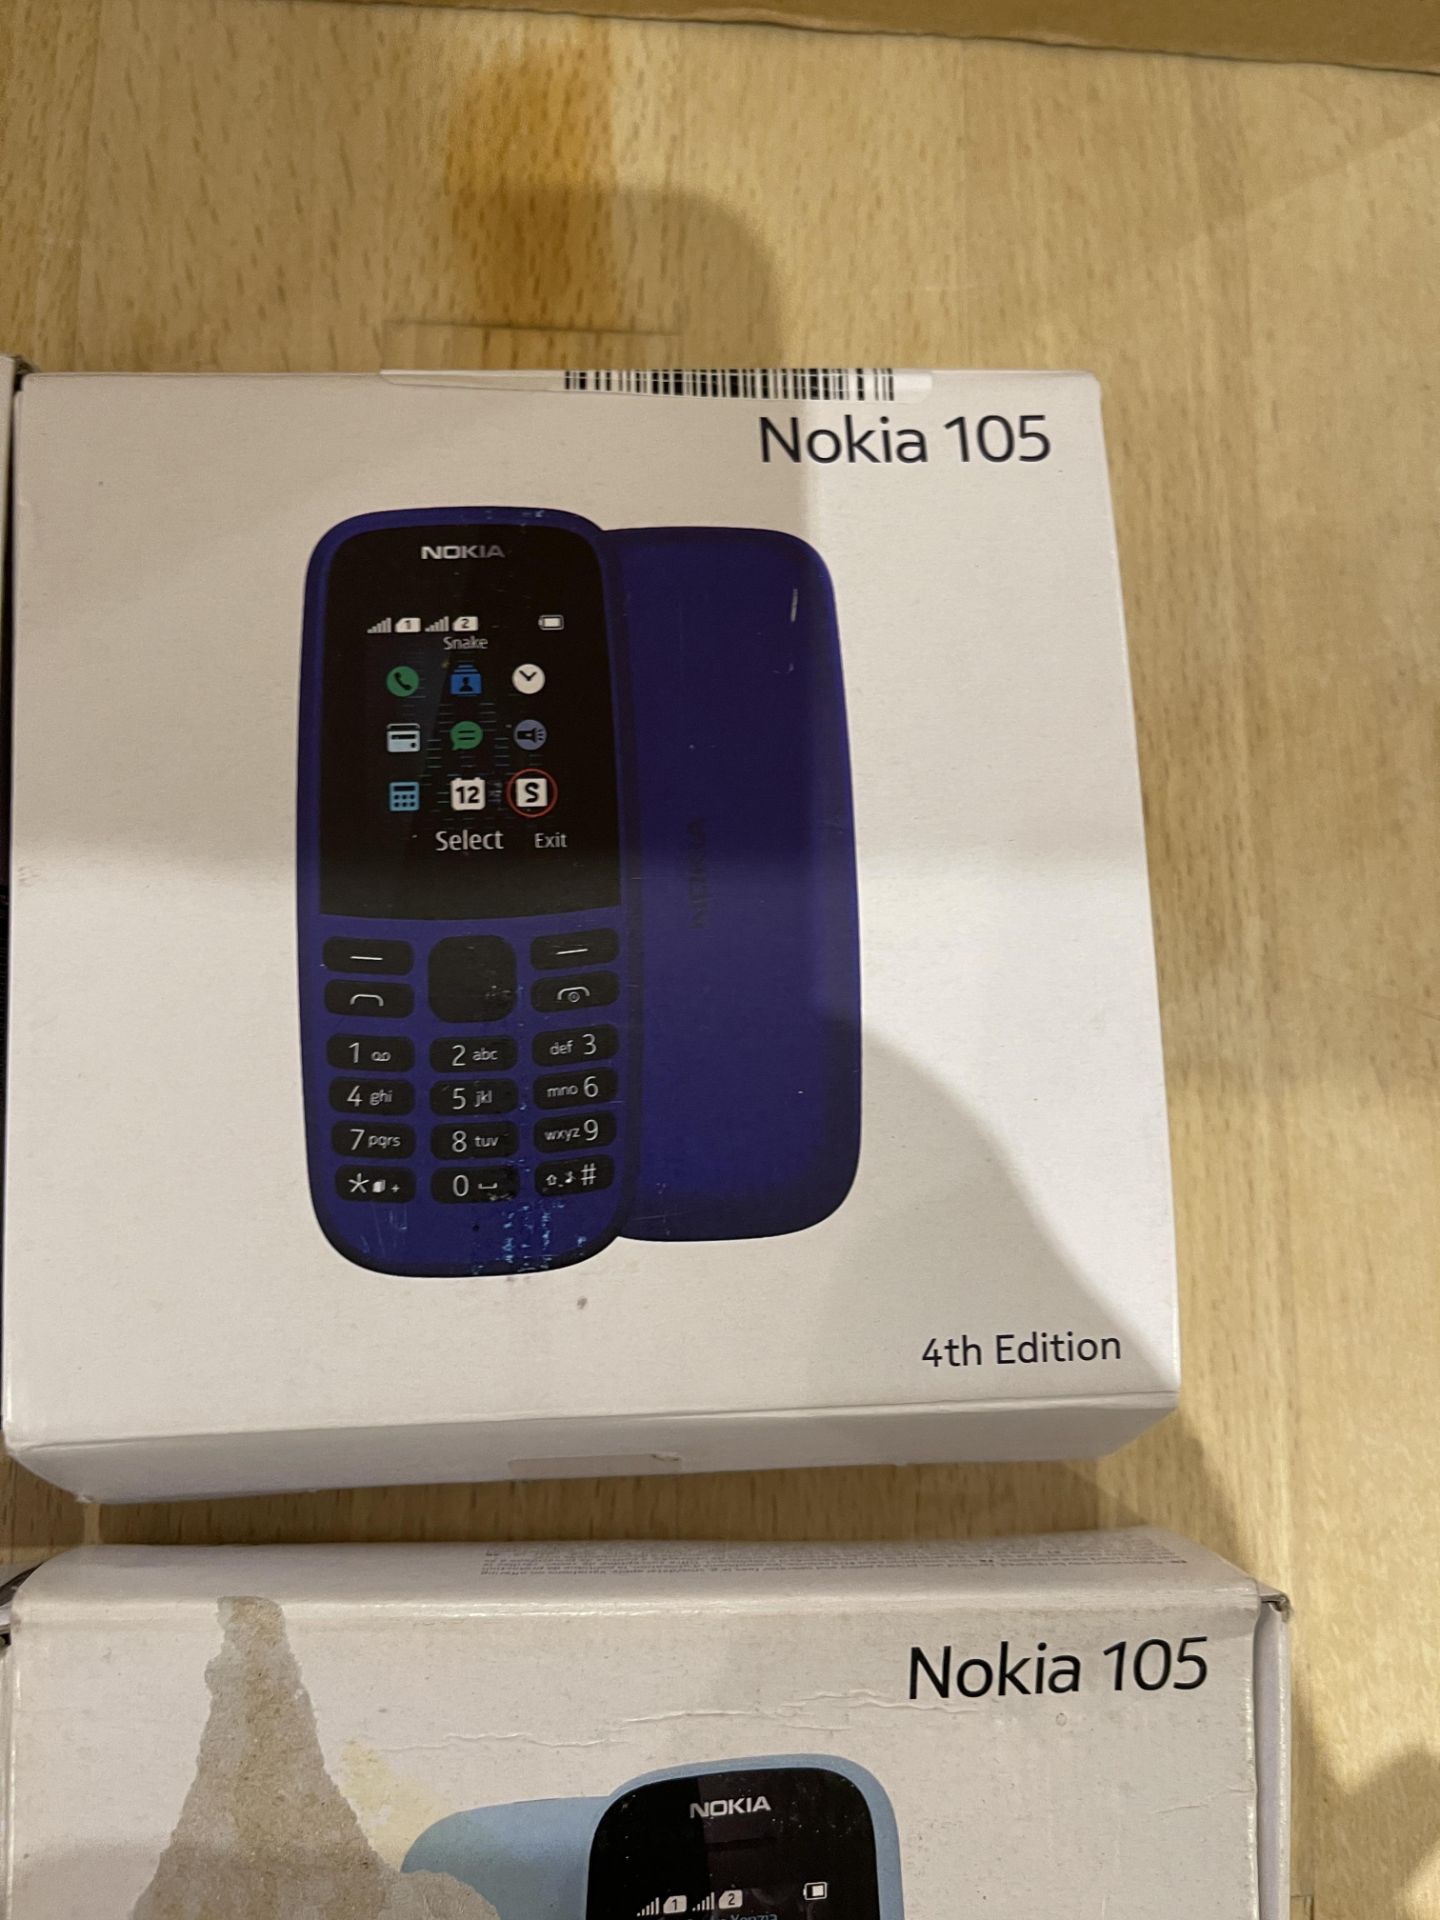 6: Nokia 105 Dual Sim Mobile Phones, Boxes Have Been Opened, Phone, Battery & Charger All Present - - Image 5 of 15